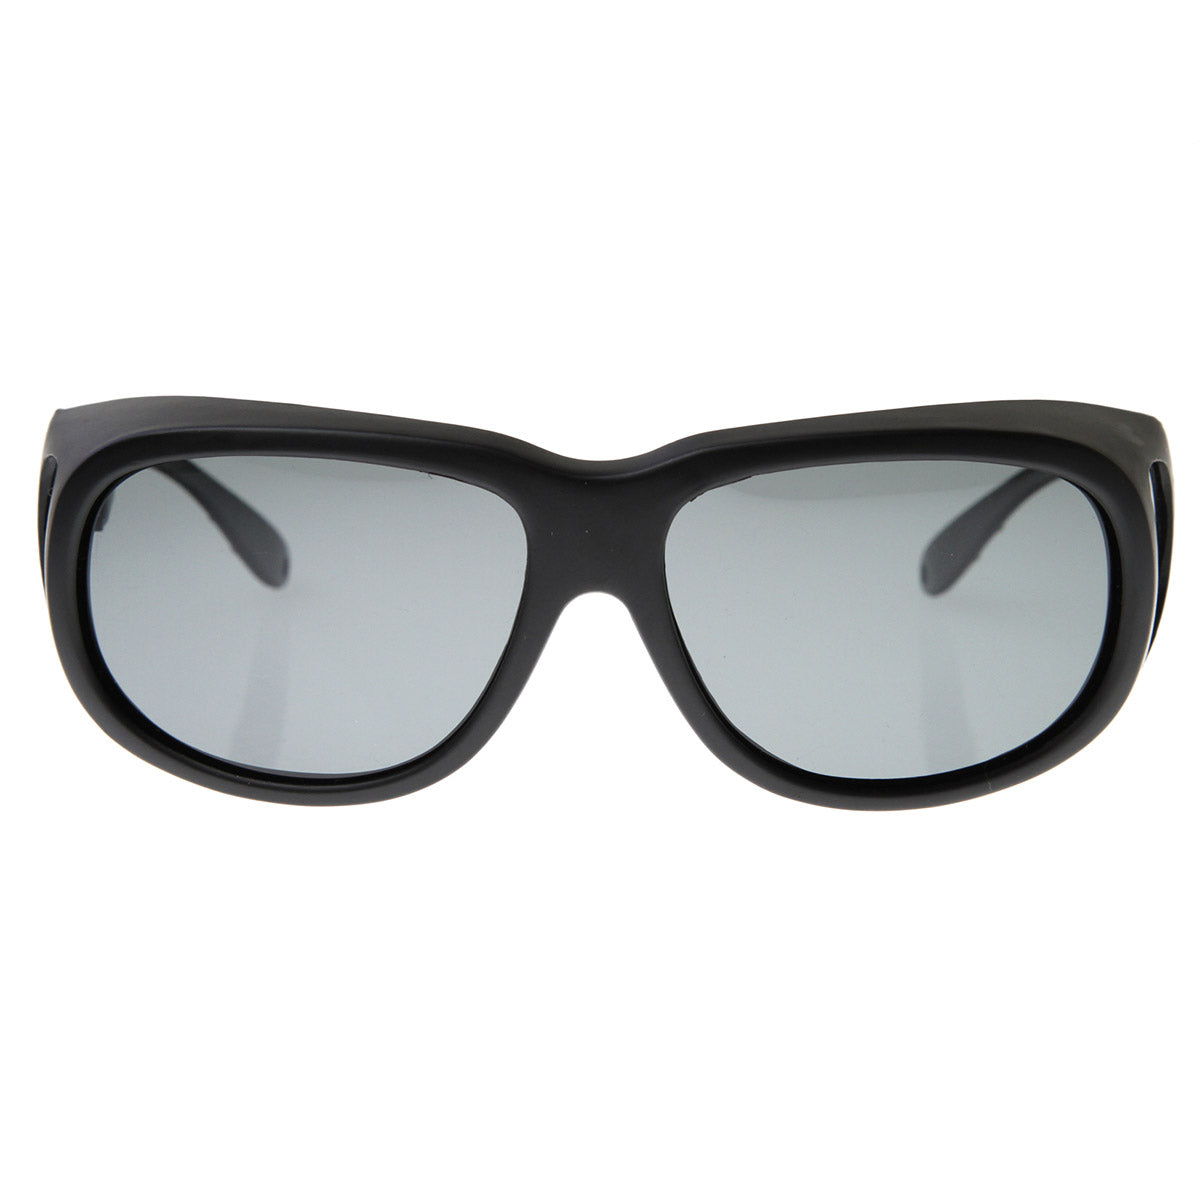 Clash Mask Silver Sunglasses Unisex Z2310E Fashion Trend In Black And White  Square Frame With Anti UV Lens For Outdoor Activities From Haleyr, $43.11